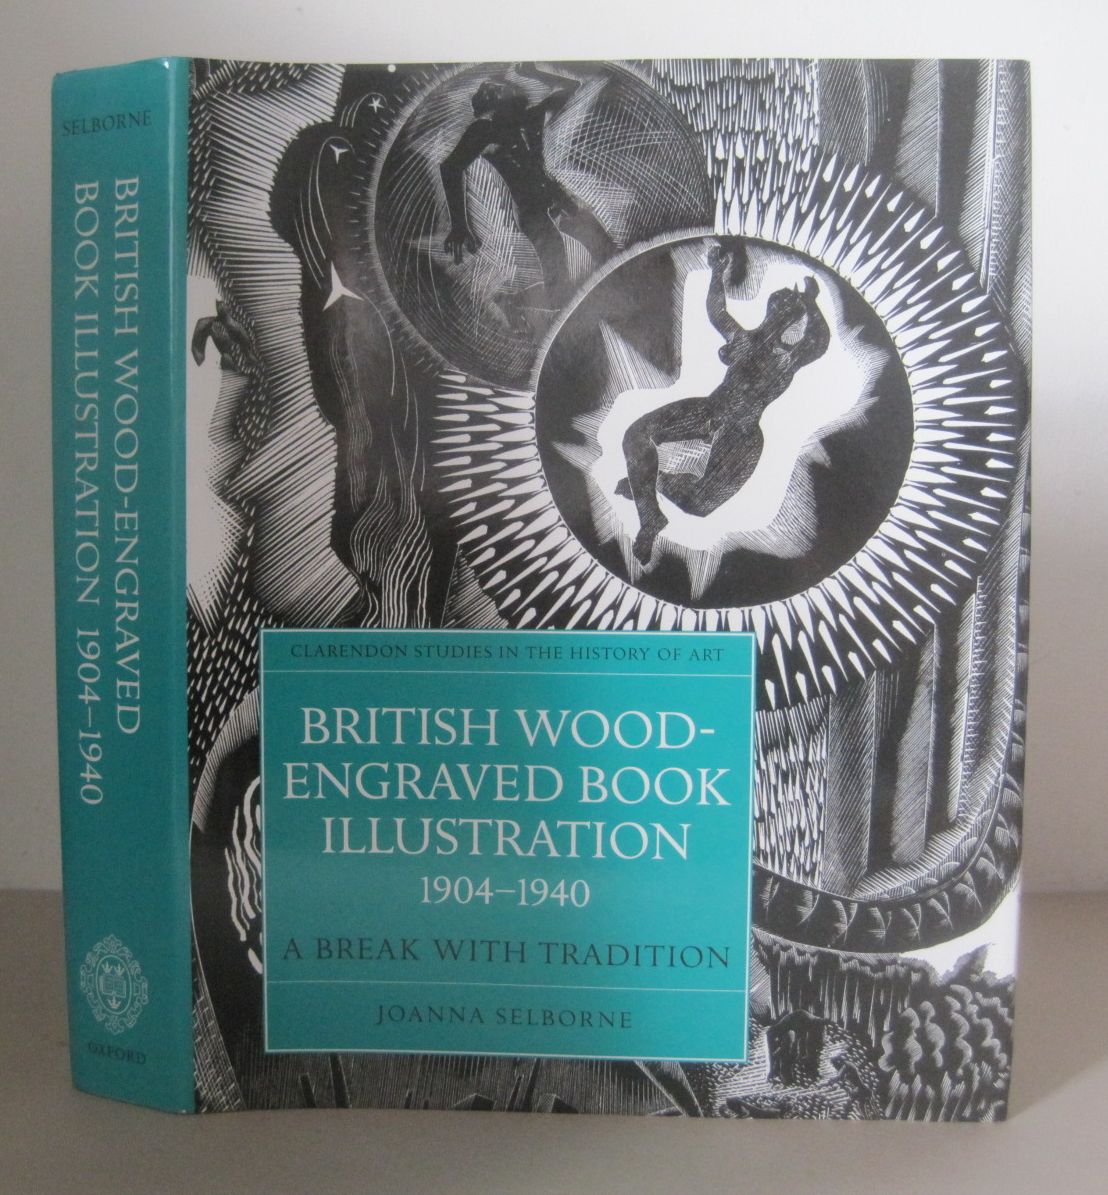 British Wood-Engraved Book Illustration 1904-1940: A Break with Tradition. - SELBORNE, JOANNA.